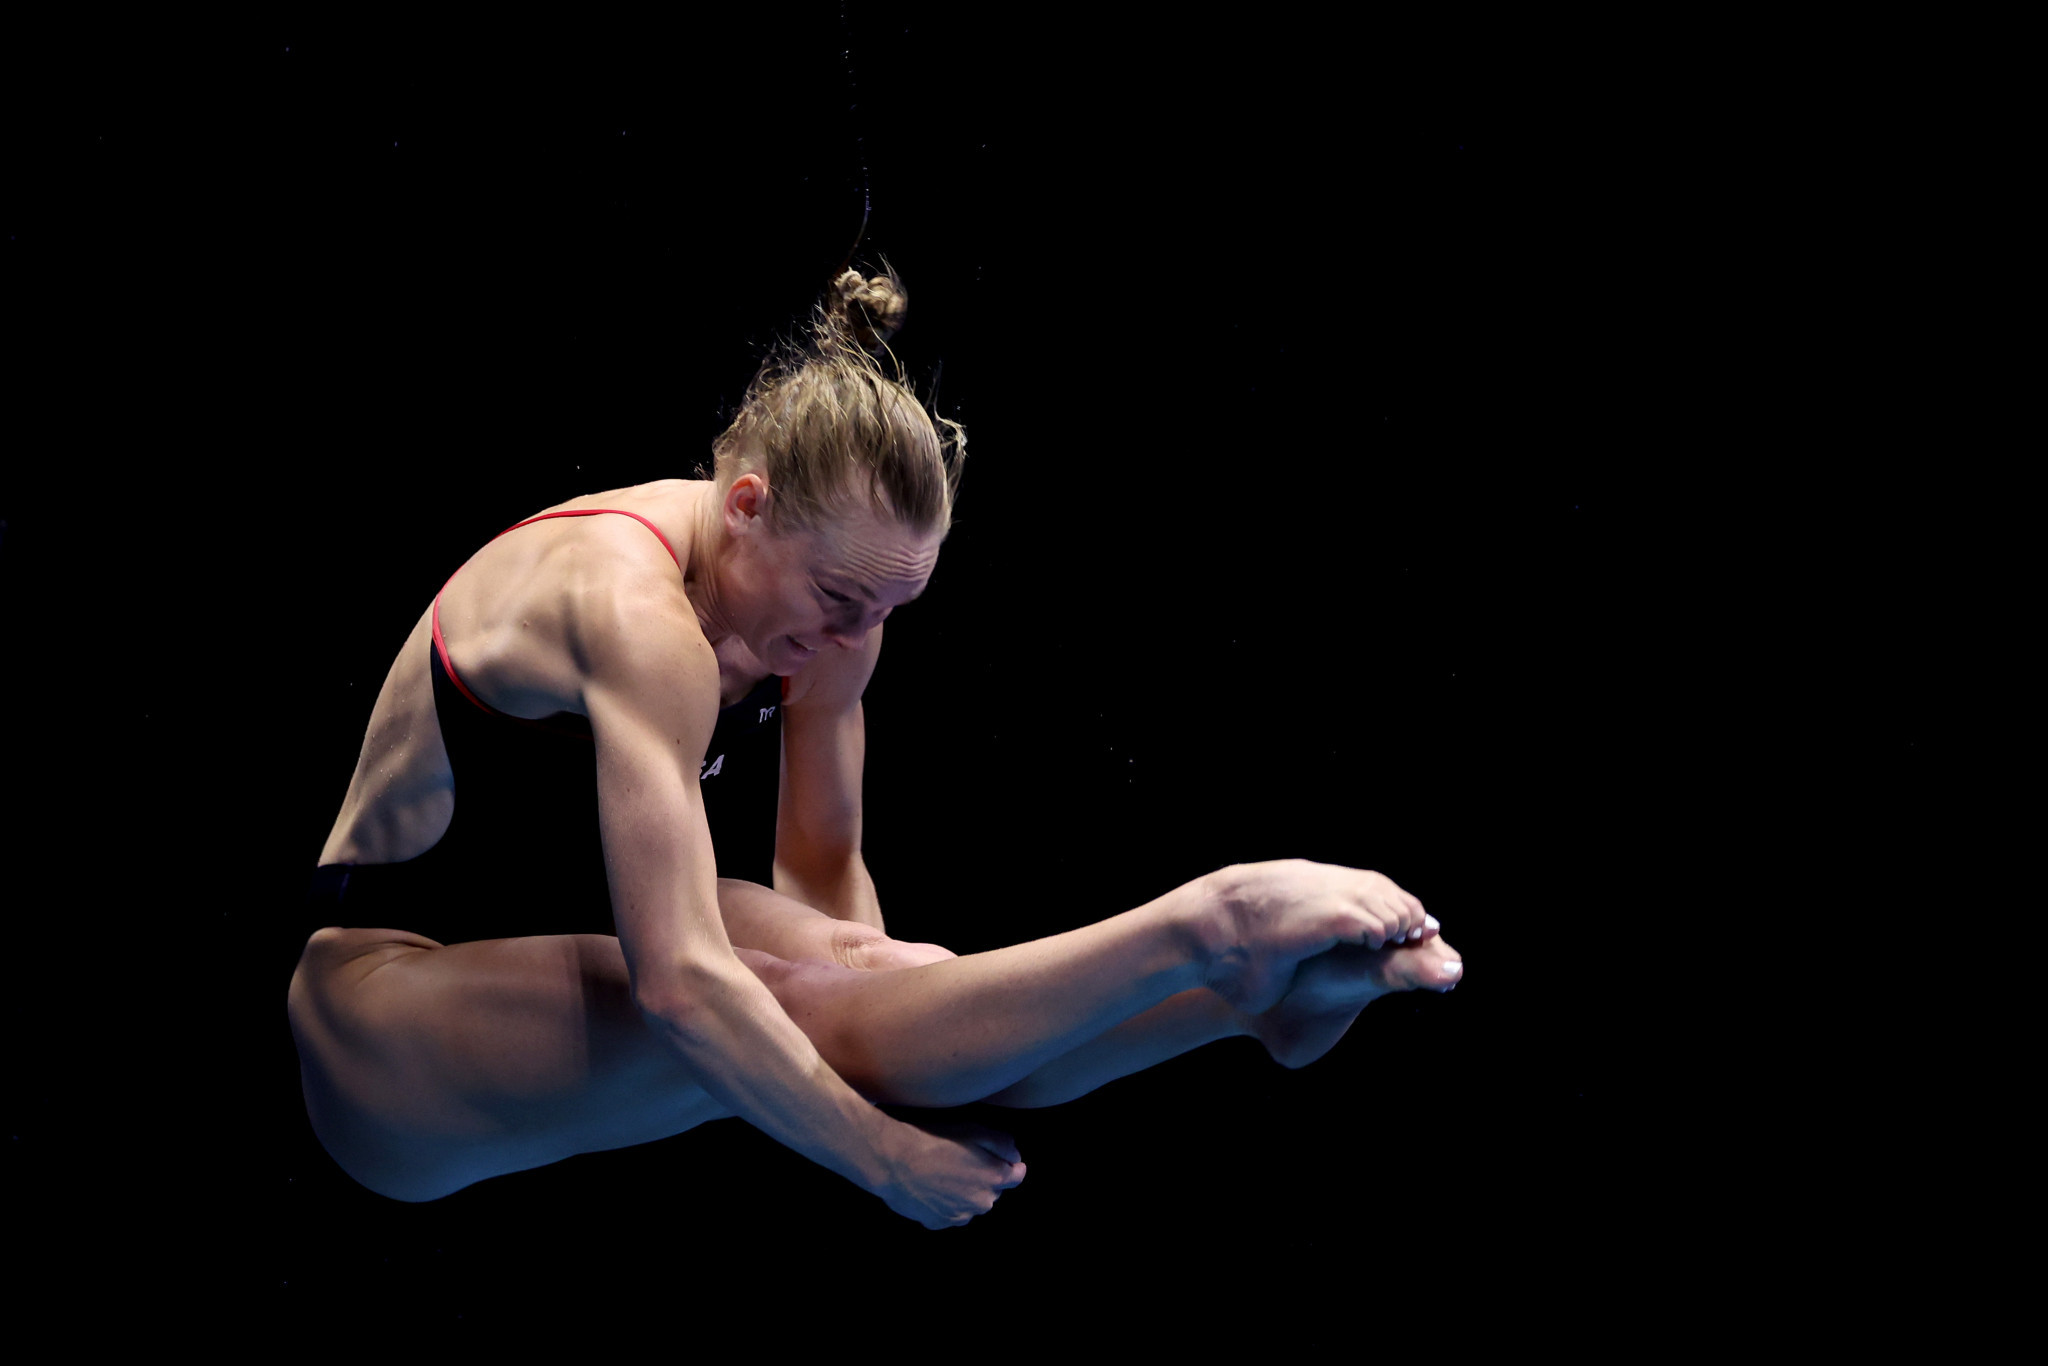 Olympic diving silver medallist Delaney Schnell has made the cut ©Getty Images